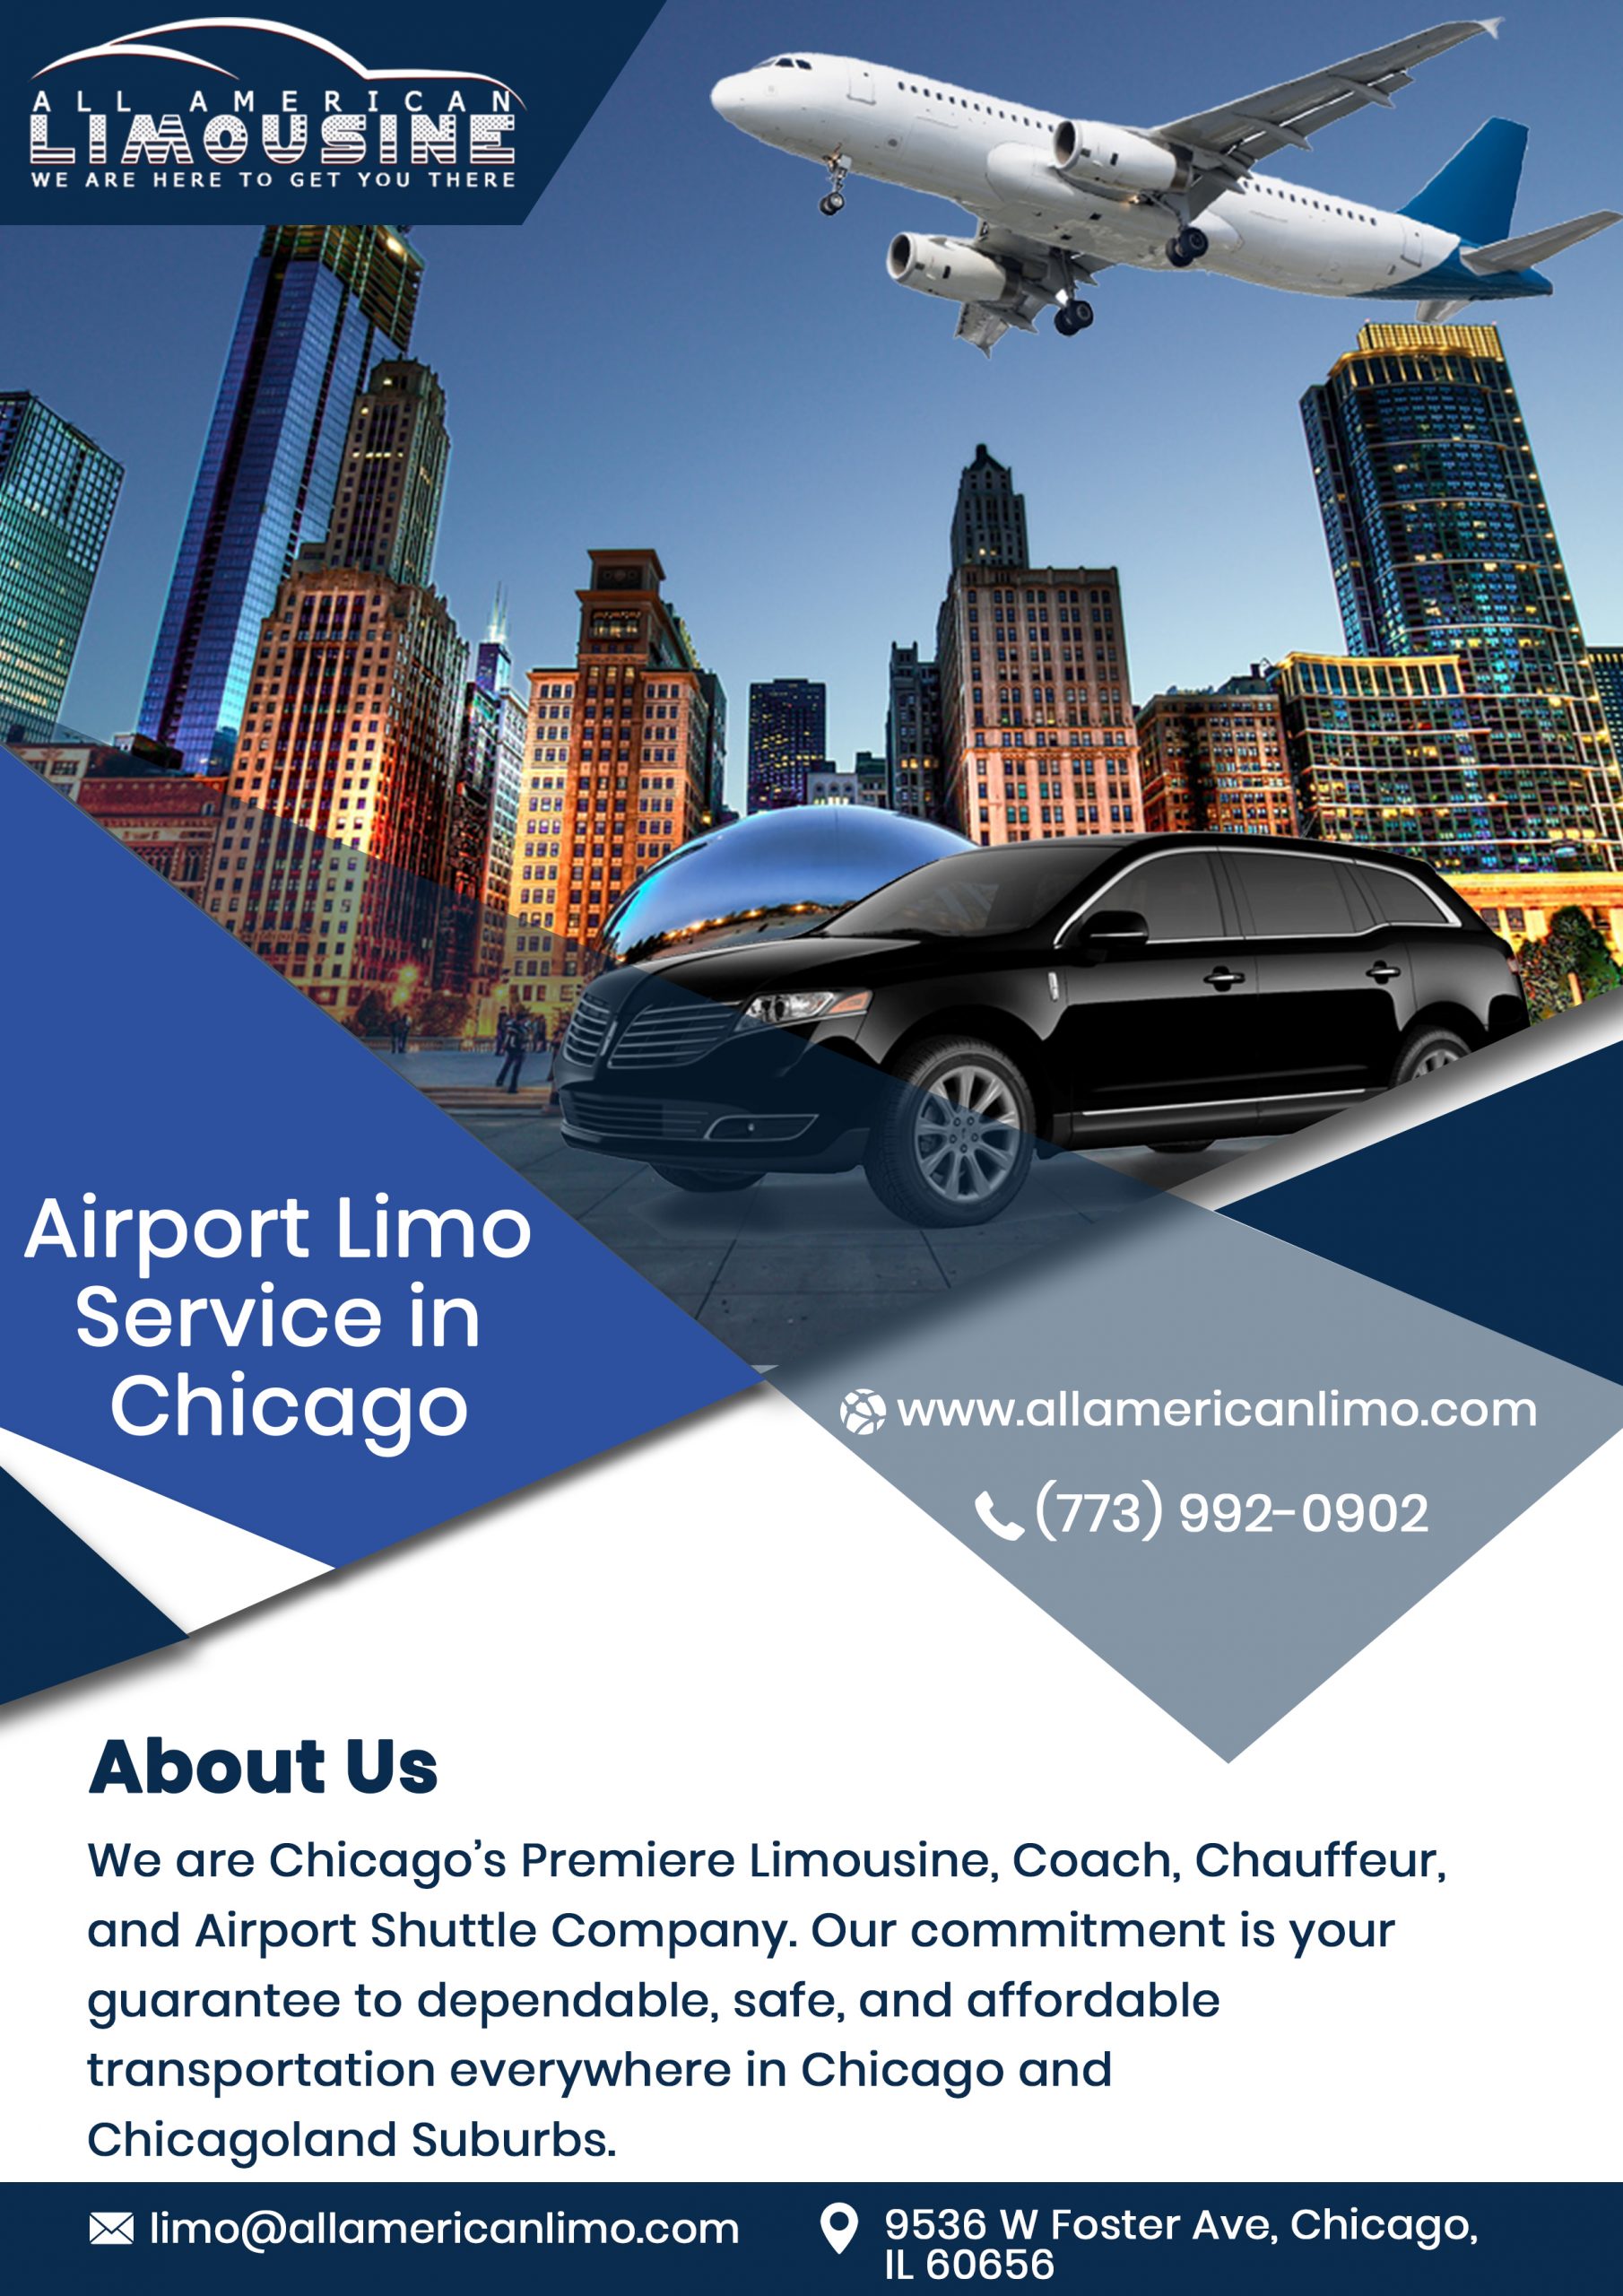 Chicago Car Service Near Me 60626, Party Bus 60626, Mercedes Sprinter Limo to 60626, Chicago Limo 60626, Limo Service 60626 to Airport, Hire, Rent, Get, Find, Car Service 60626 to Airport, Transportation Service 60626 to O'Hare, Corporate Travel 60626, Airport Travel 60626